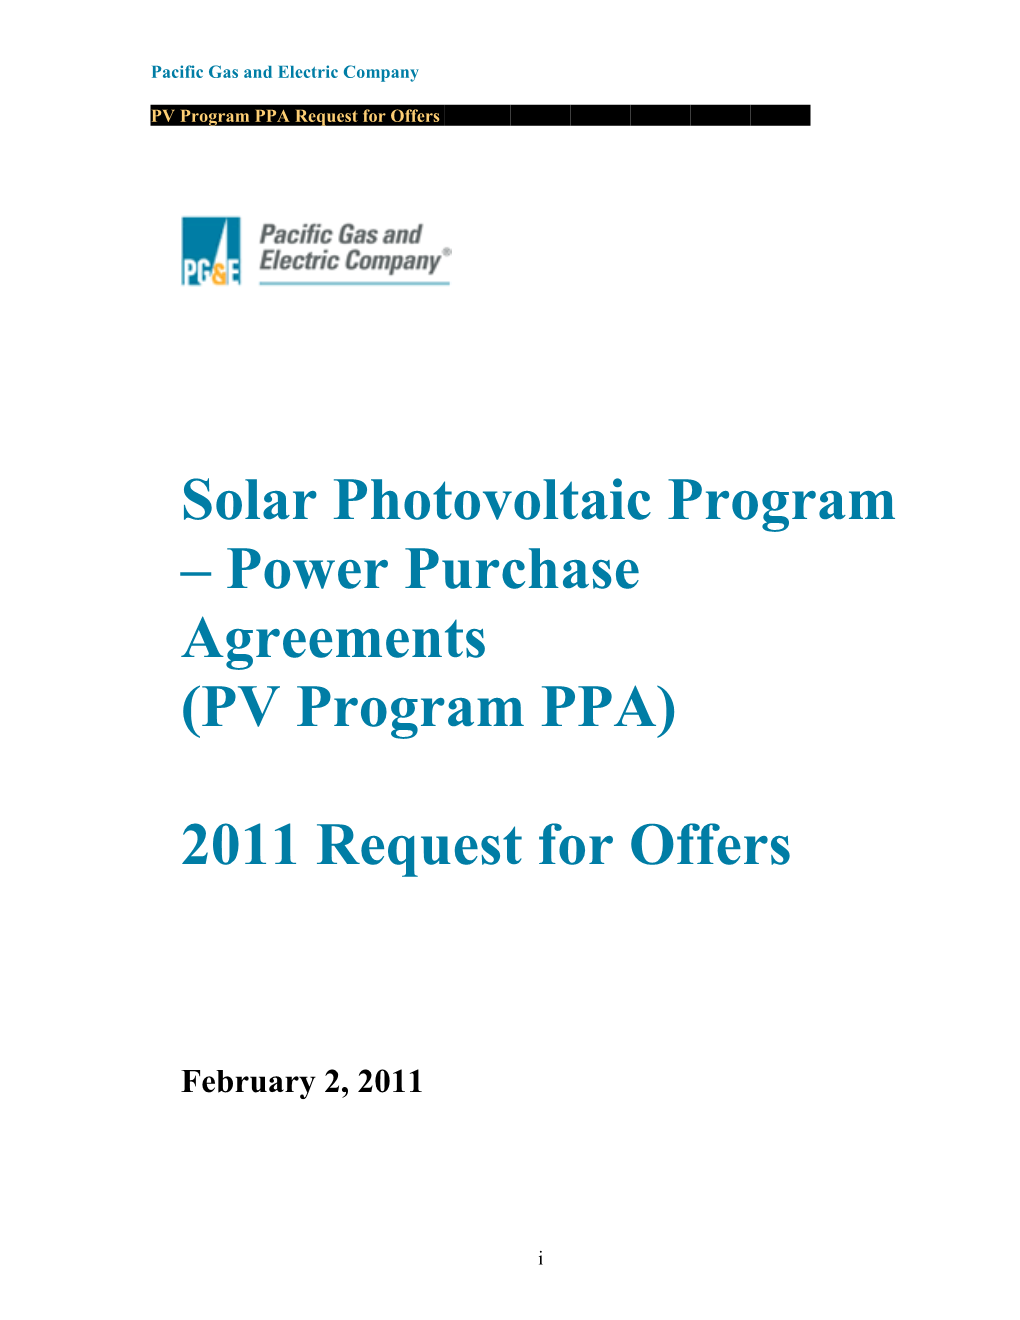 PV Program PPA Request for Offers